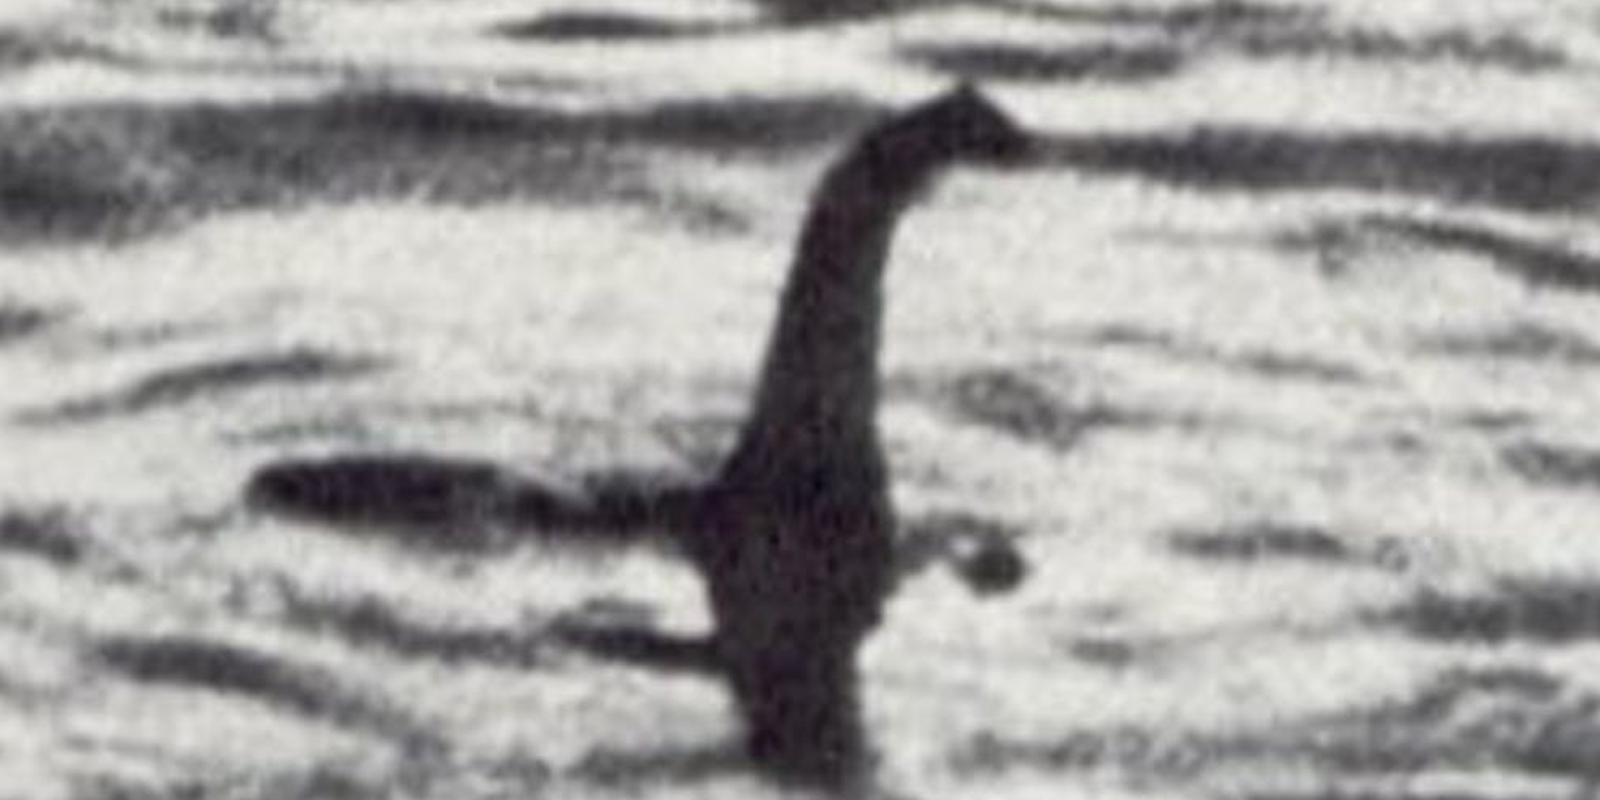 Was the Loch Ness Monster invented by a PR agency?